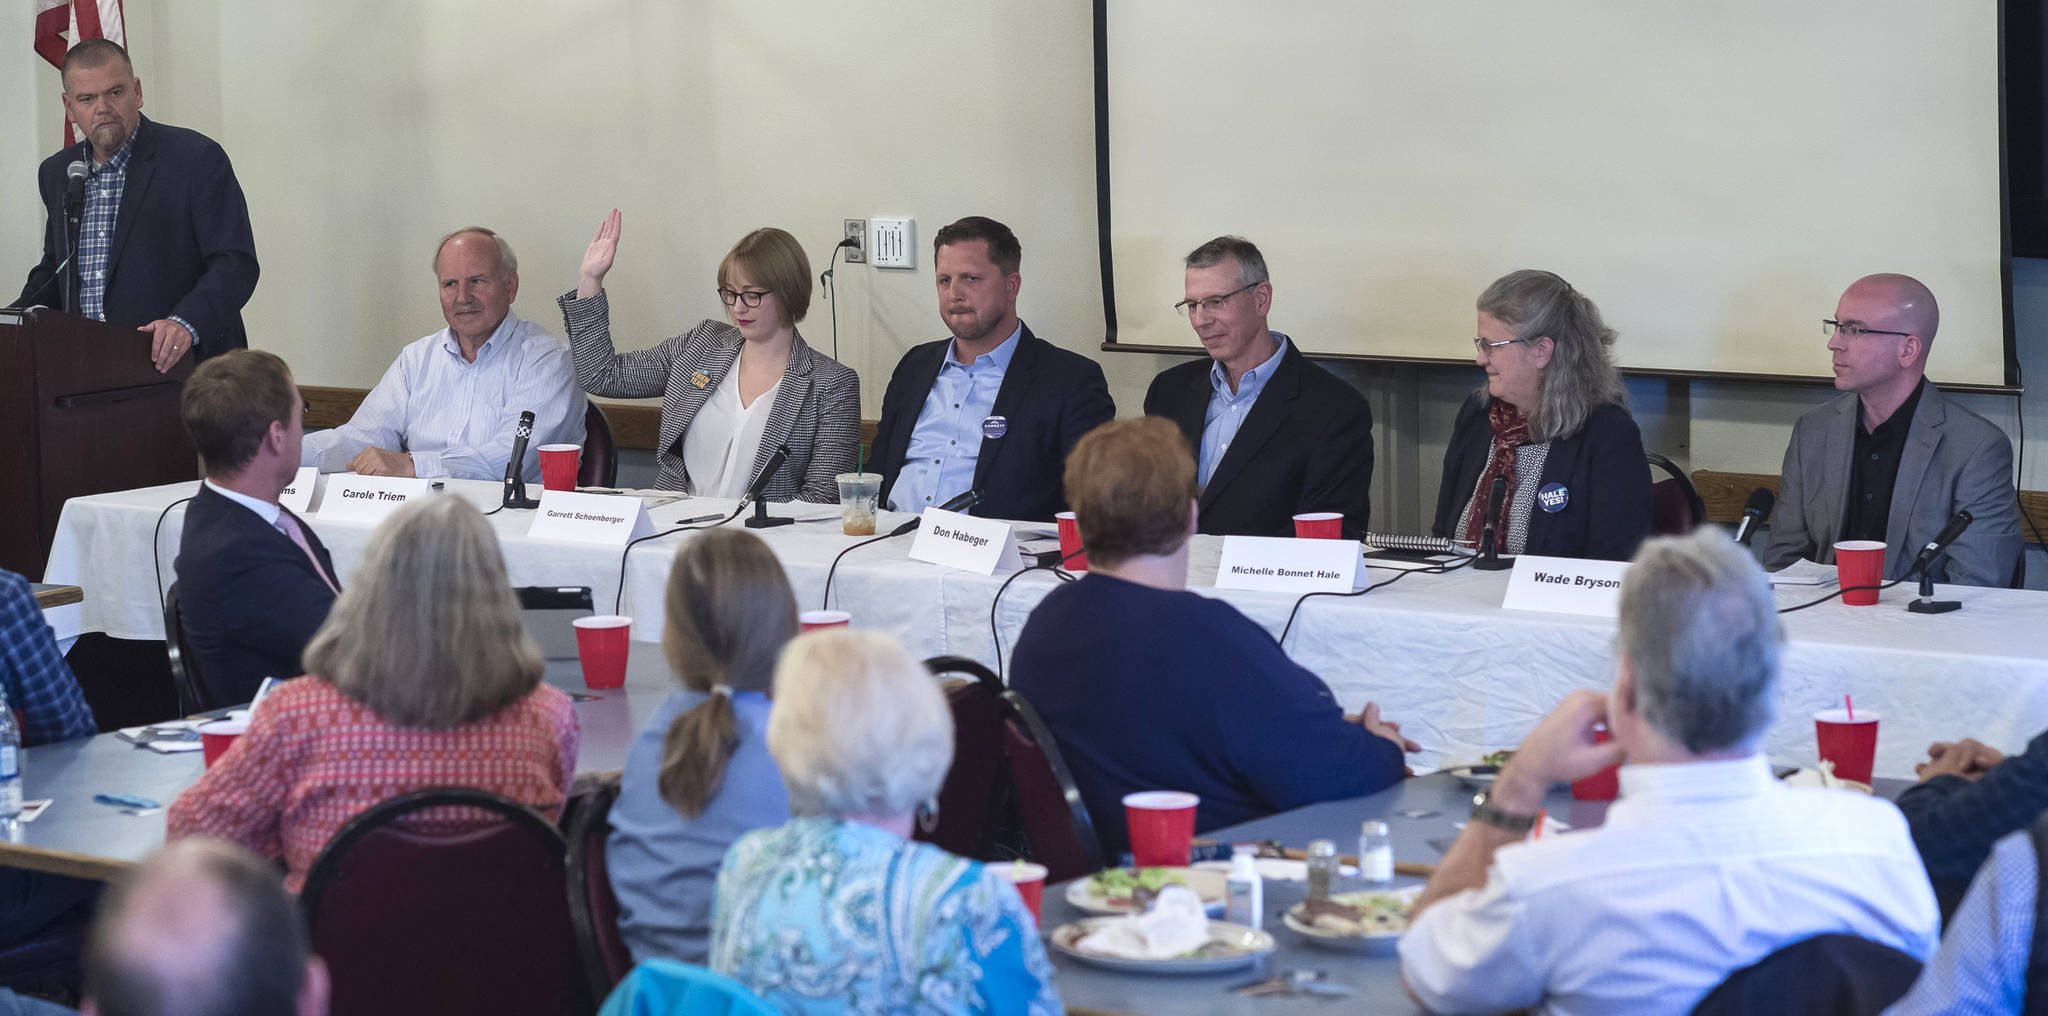 Juneau Assembly candidates for the Areawide and District 2 seats are asked to raise their hand if they support Ballot Measure 1, Stand for Salmon, during a forum at the Juneau Chamber of Commerce during its weekly luncheon at the Moose Lodge on Thursday, Sept. 20, 2018. District 2 candidate Emil Mackey did not attend the event because of work travel. (Michael Penn | Juneau Empire)